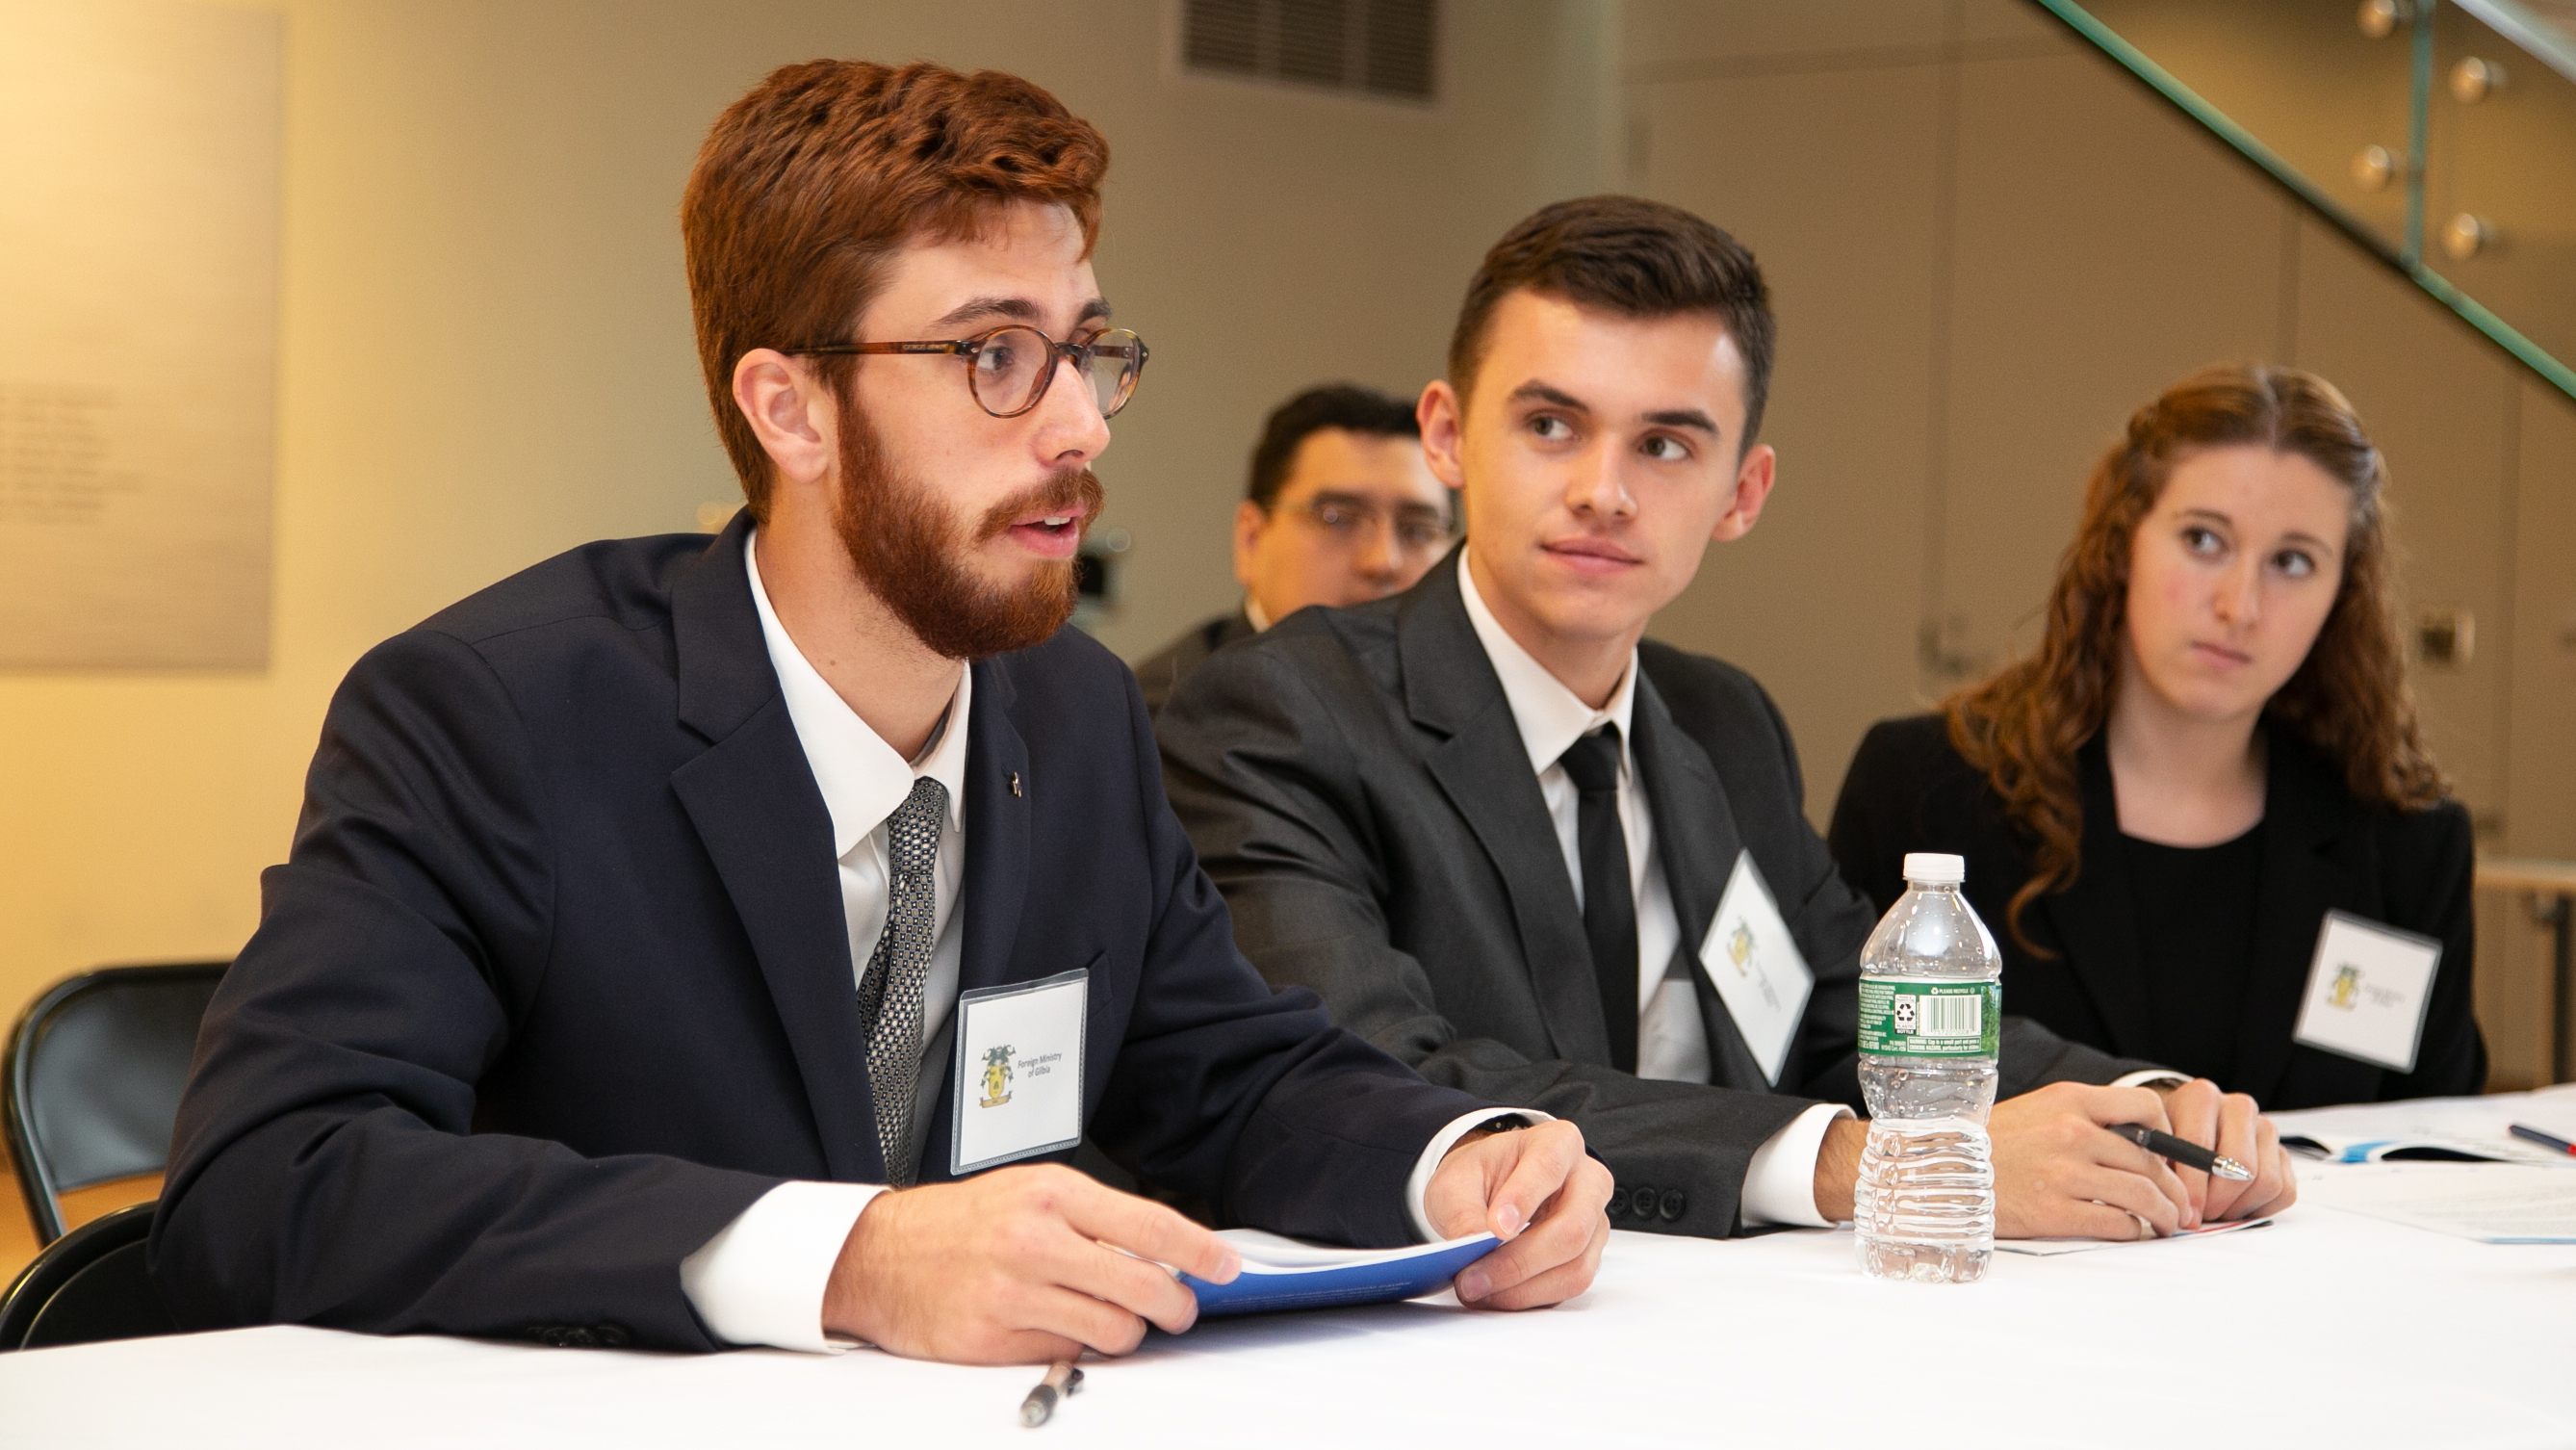 One of three students speak at a table at a simulation.